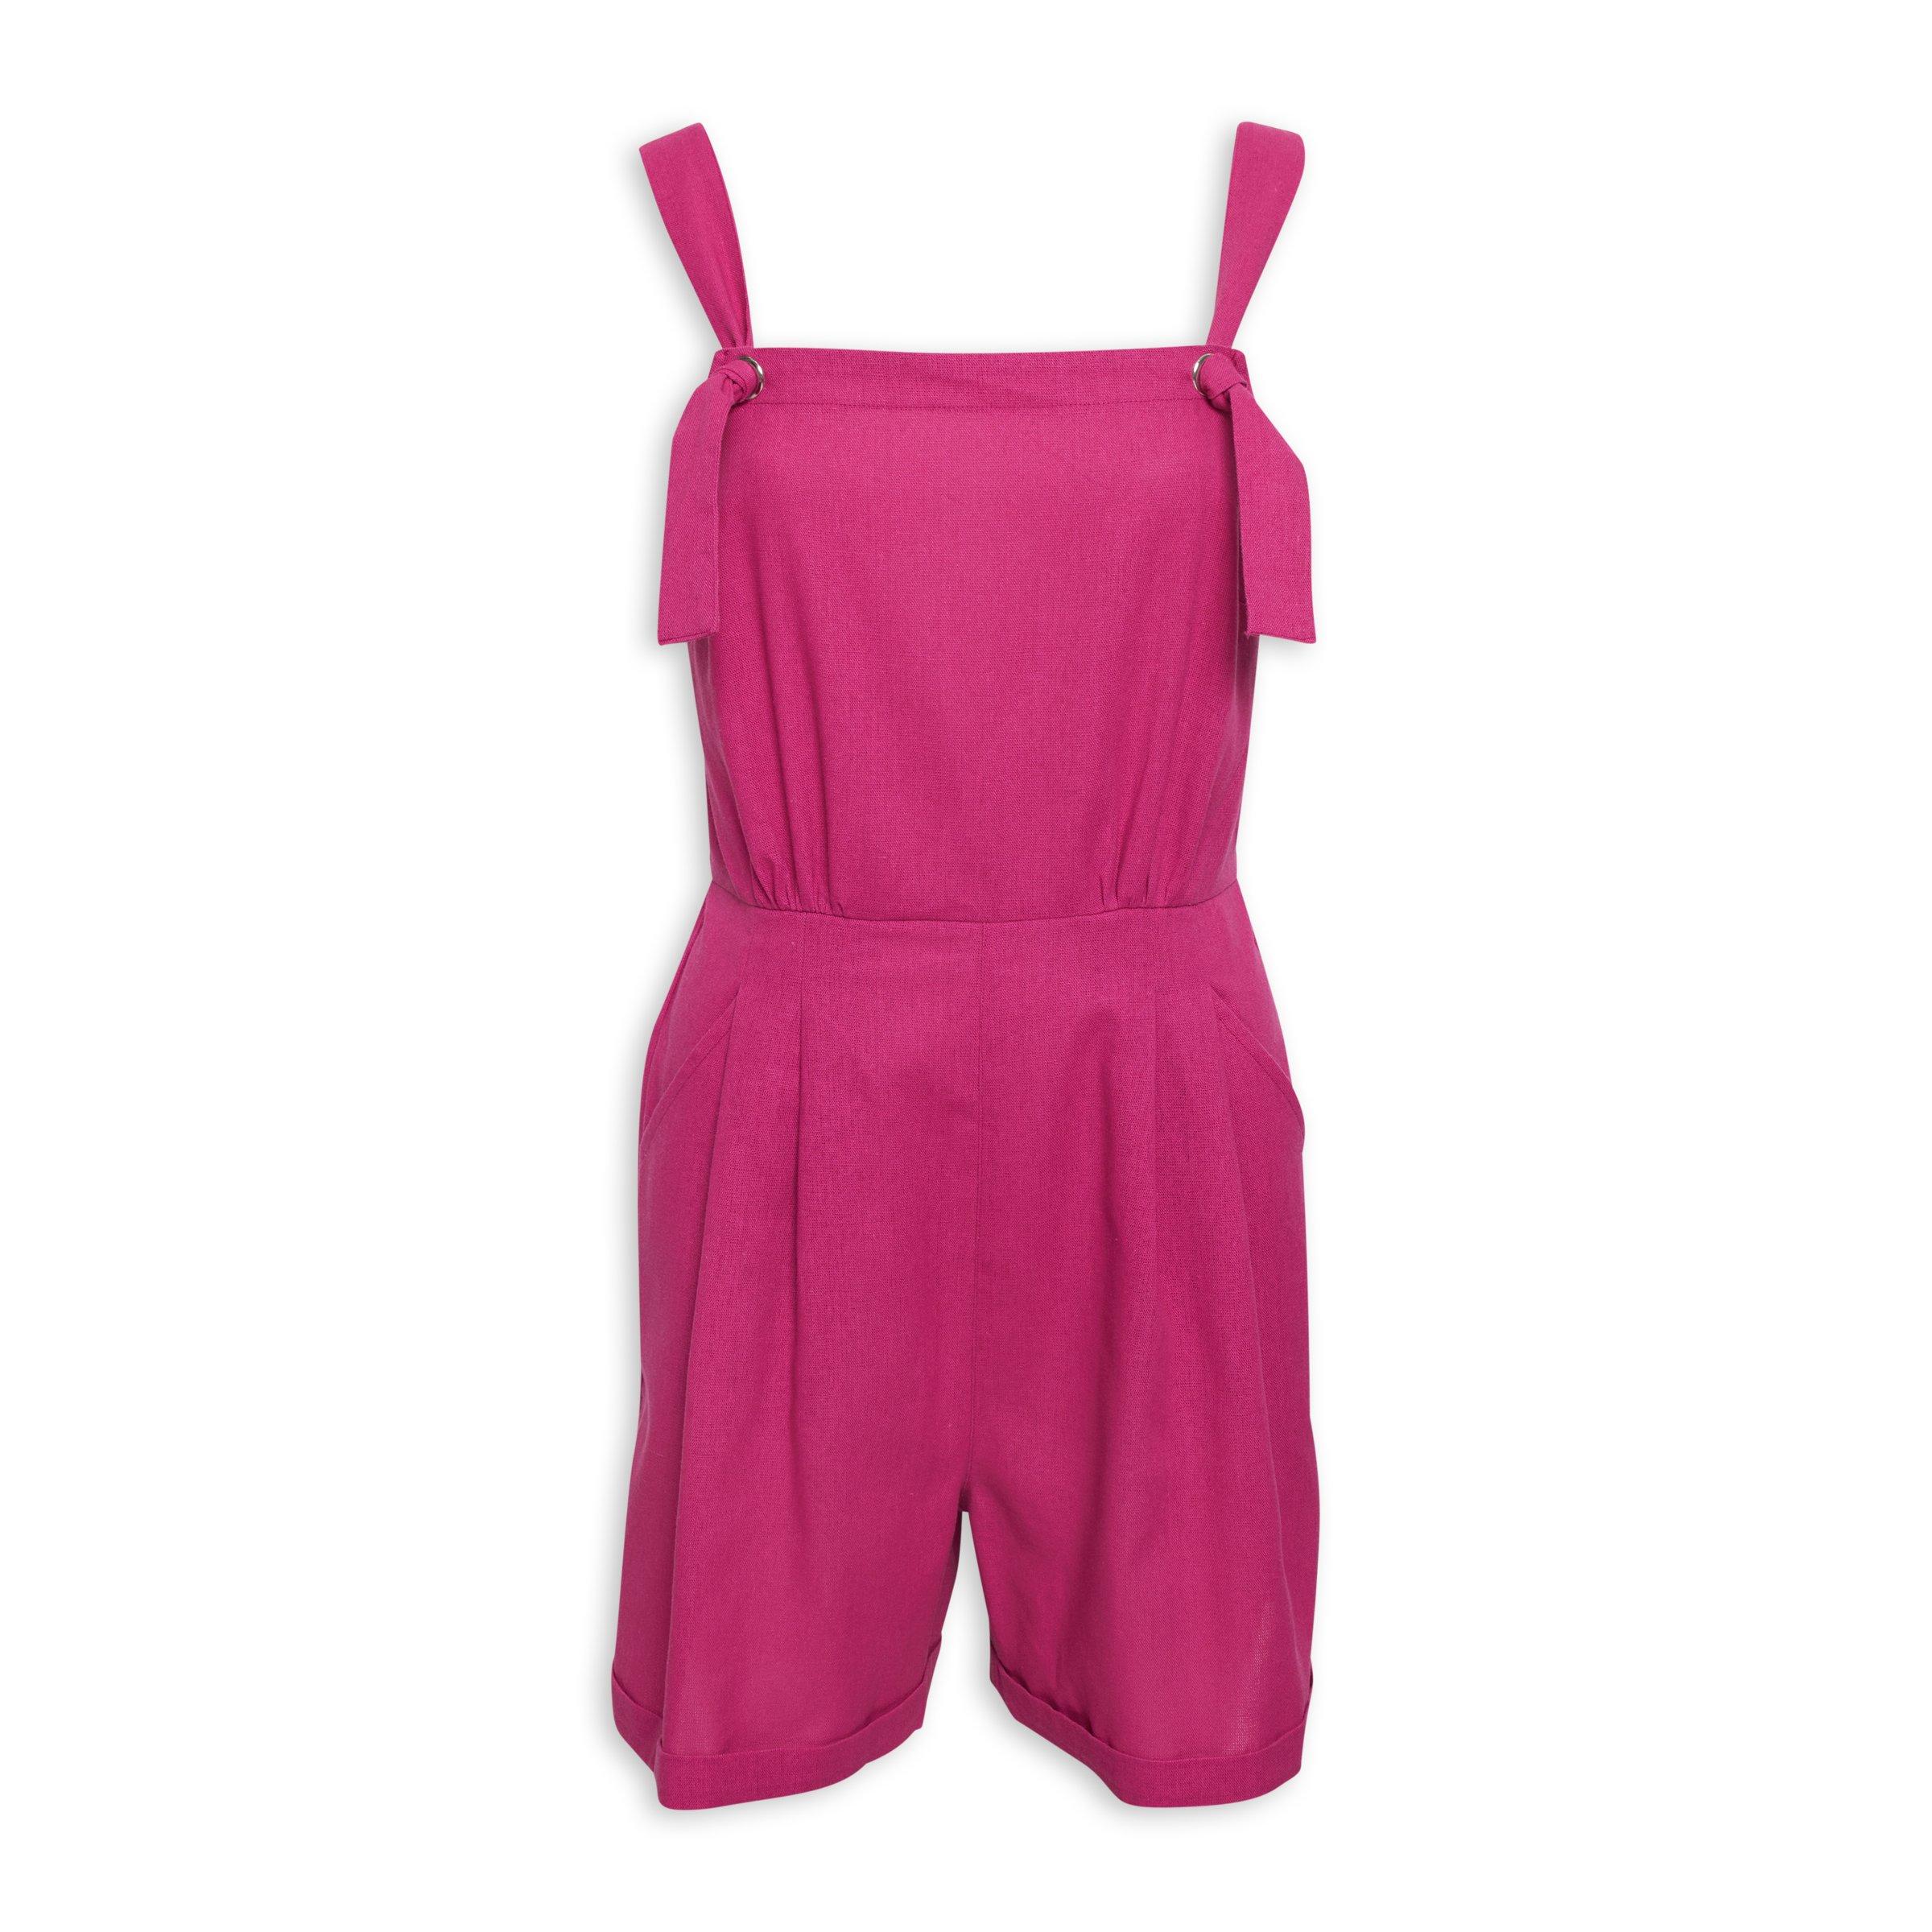 Pink Jumpsuits for Women, Rompers, Overalls & Jumpsuits